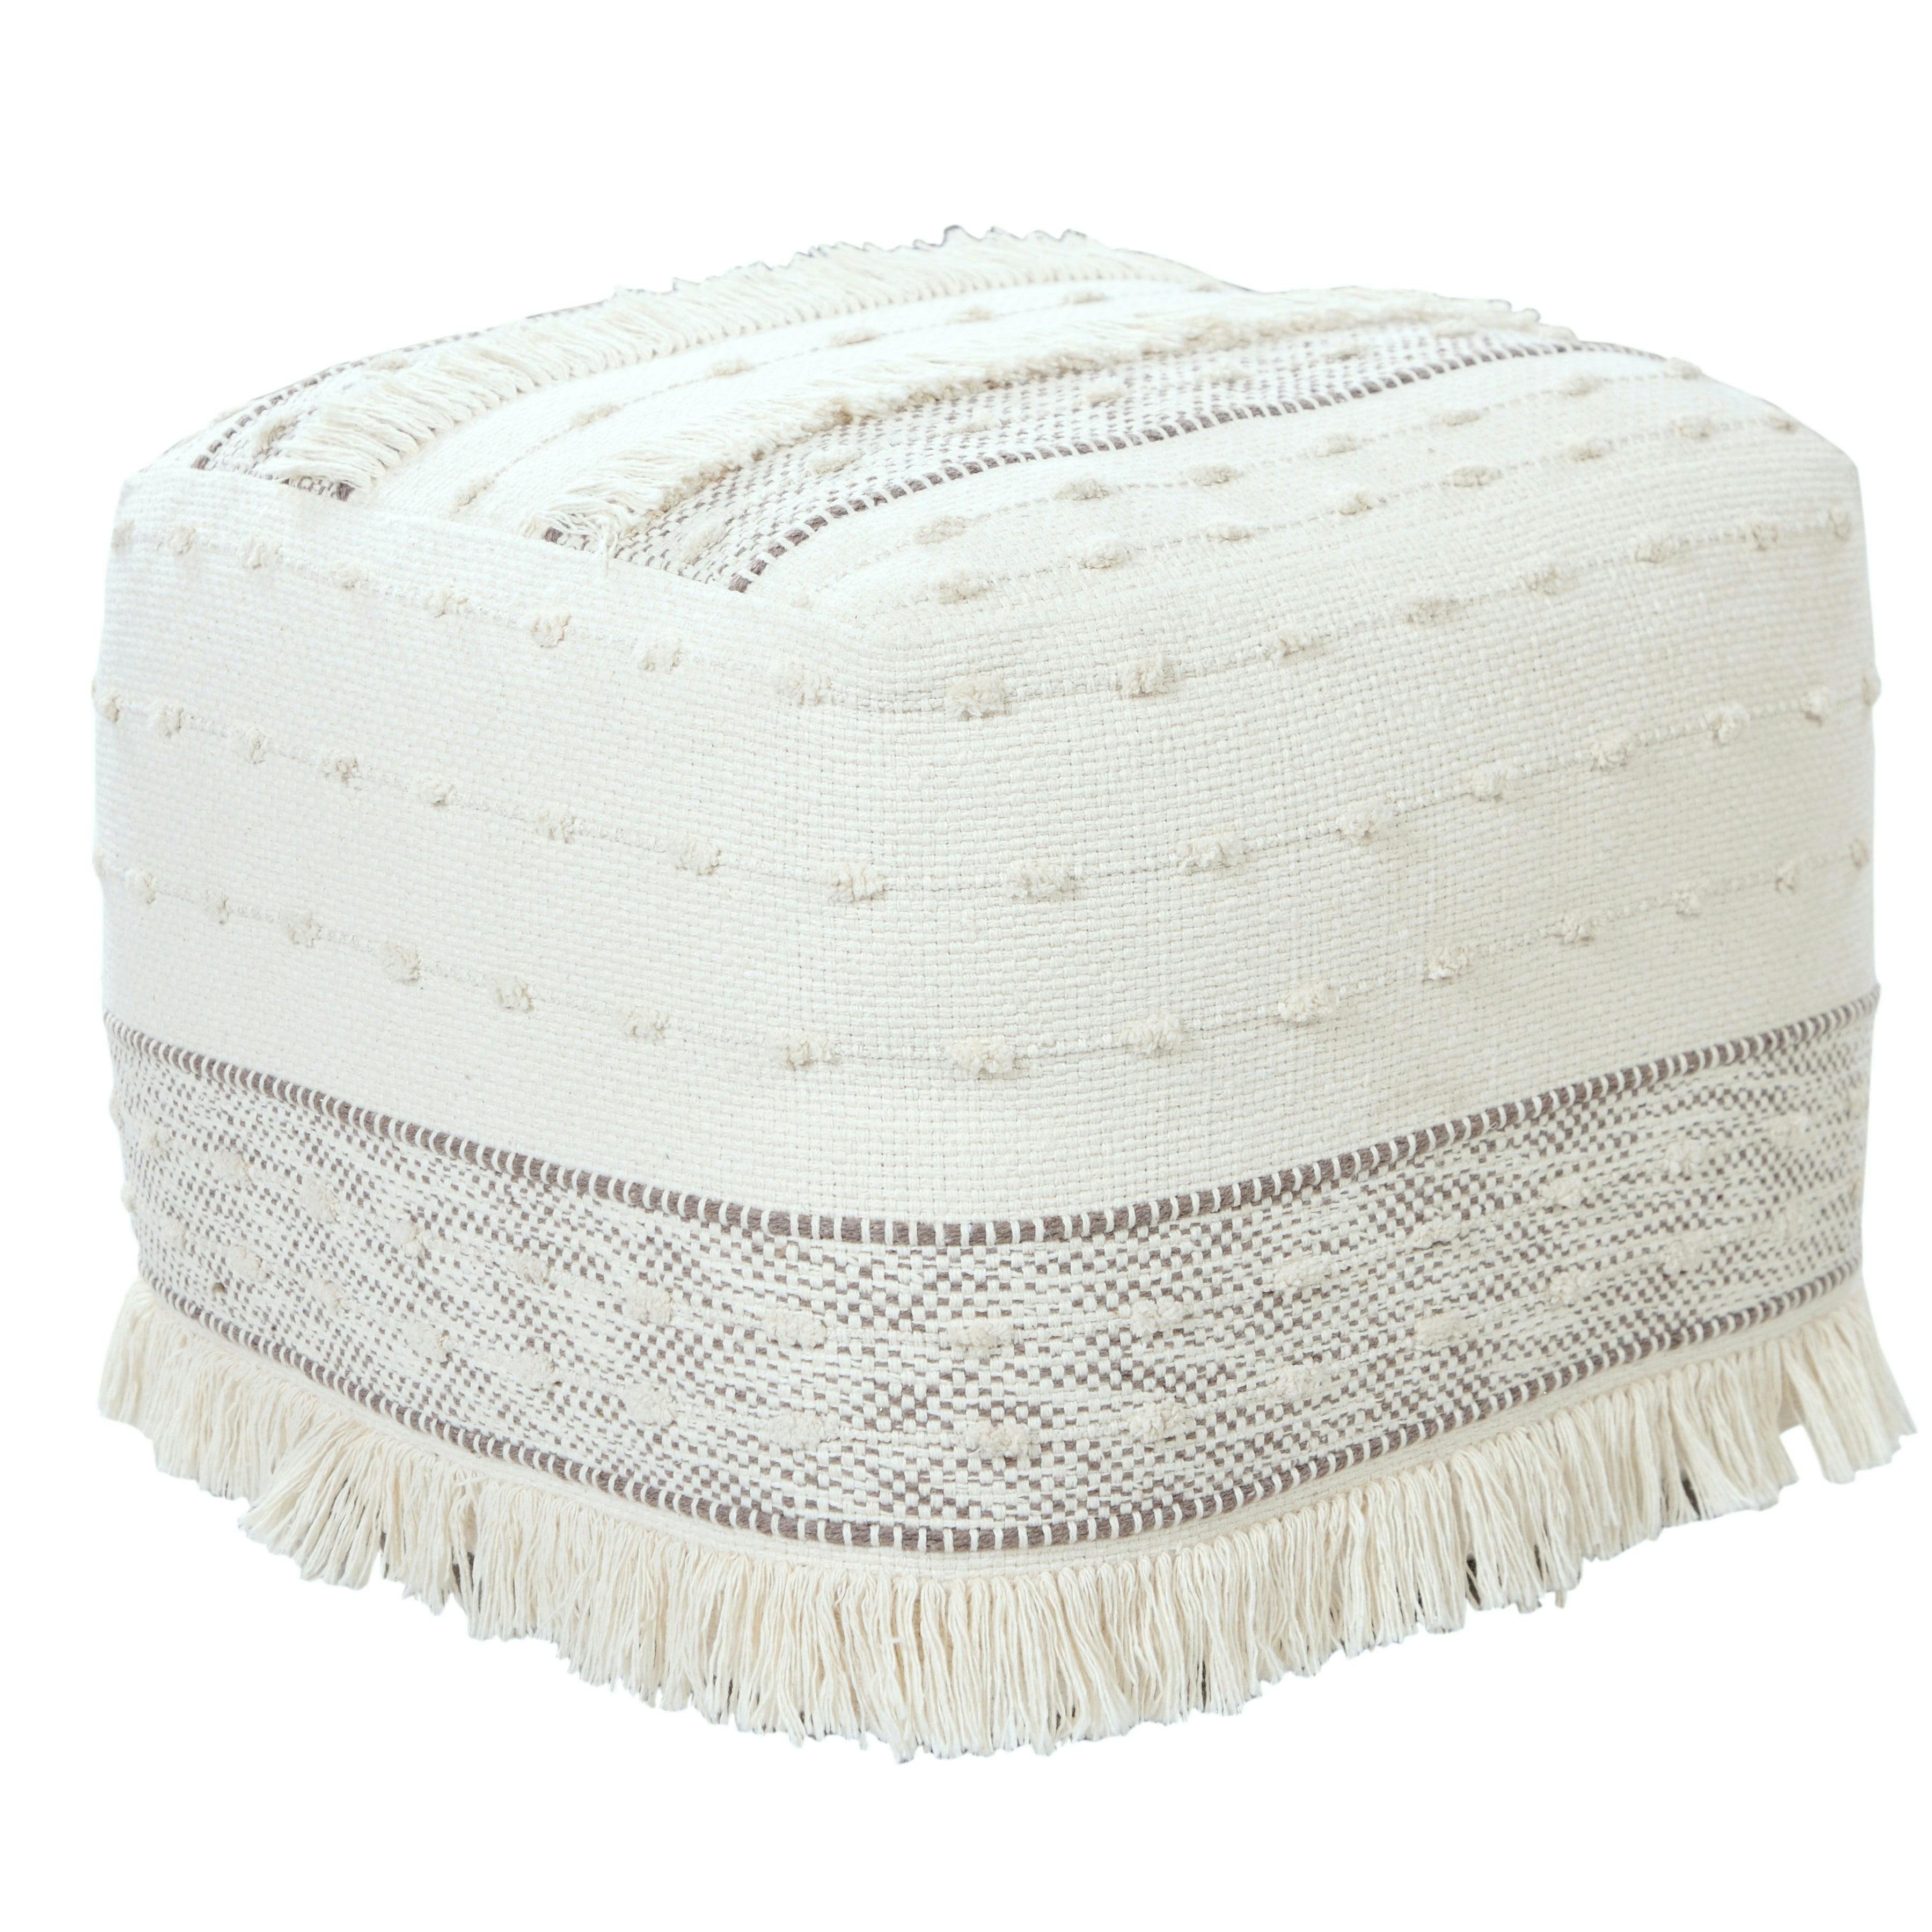 Ivory and Brown Shag Fringe Textured Square Pouf, 18" x 14"